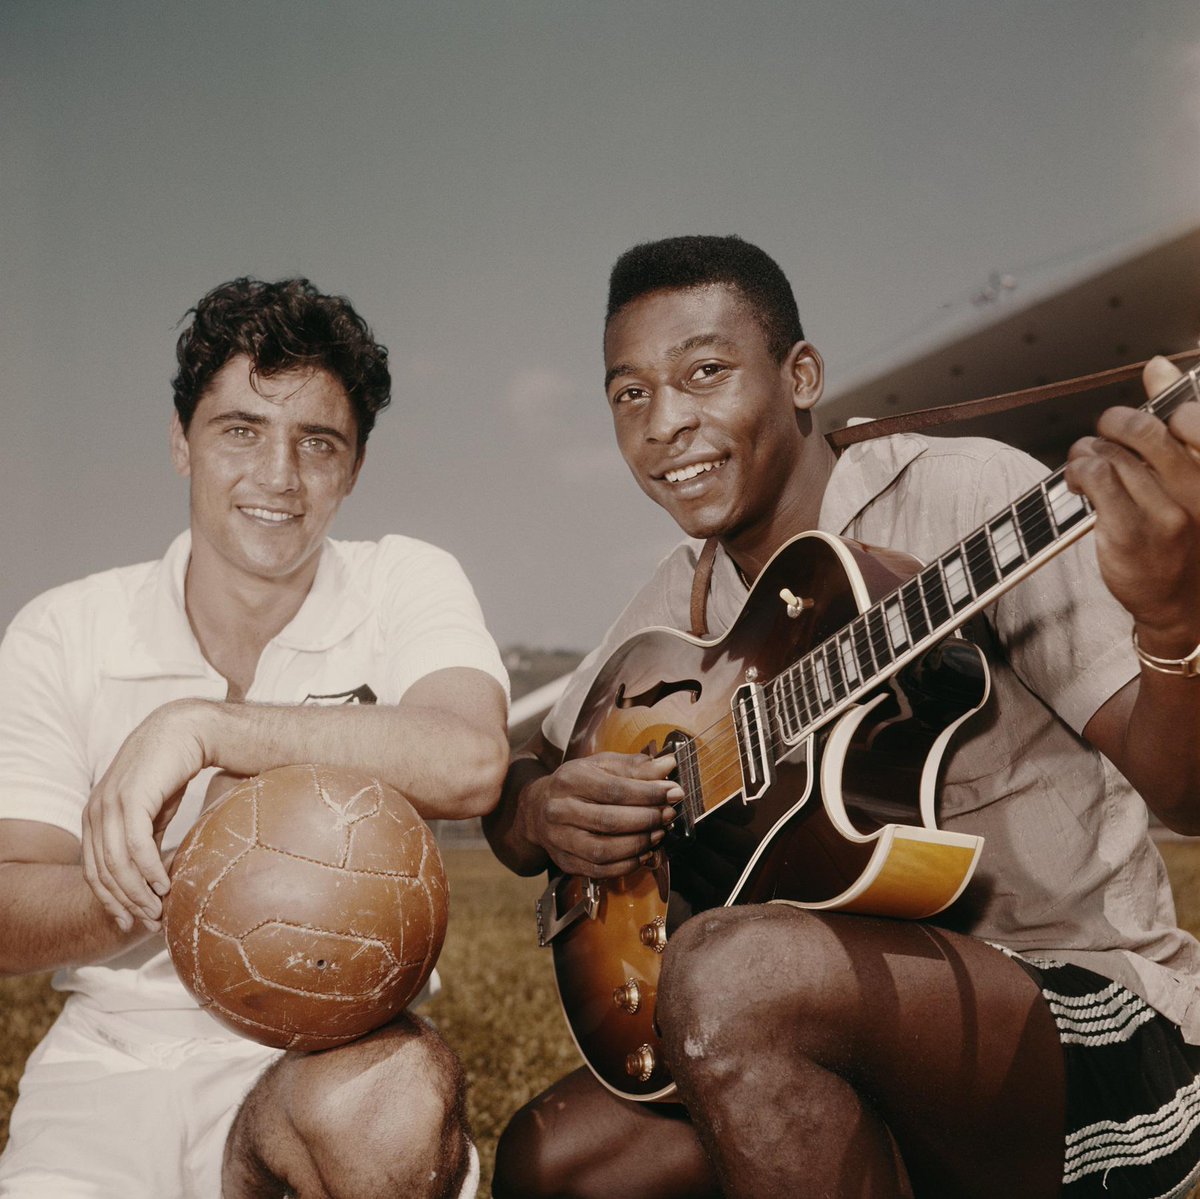 FIFA World Cup - Pelé plays an acoustic guitar surrounded by teammates at a  training session in Paineiras, before Confederação Brasileira de Futebol  leave for England to play in the 1966 World